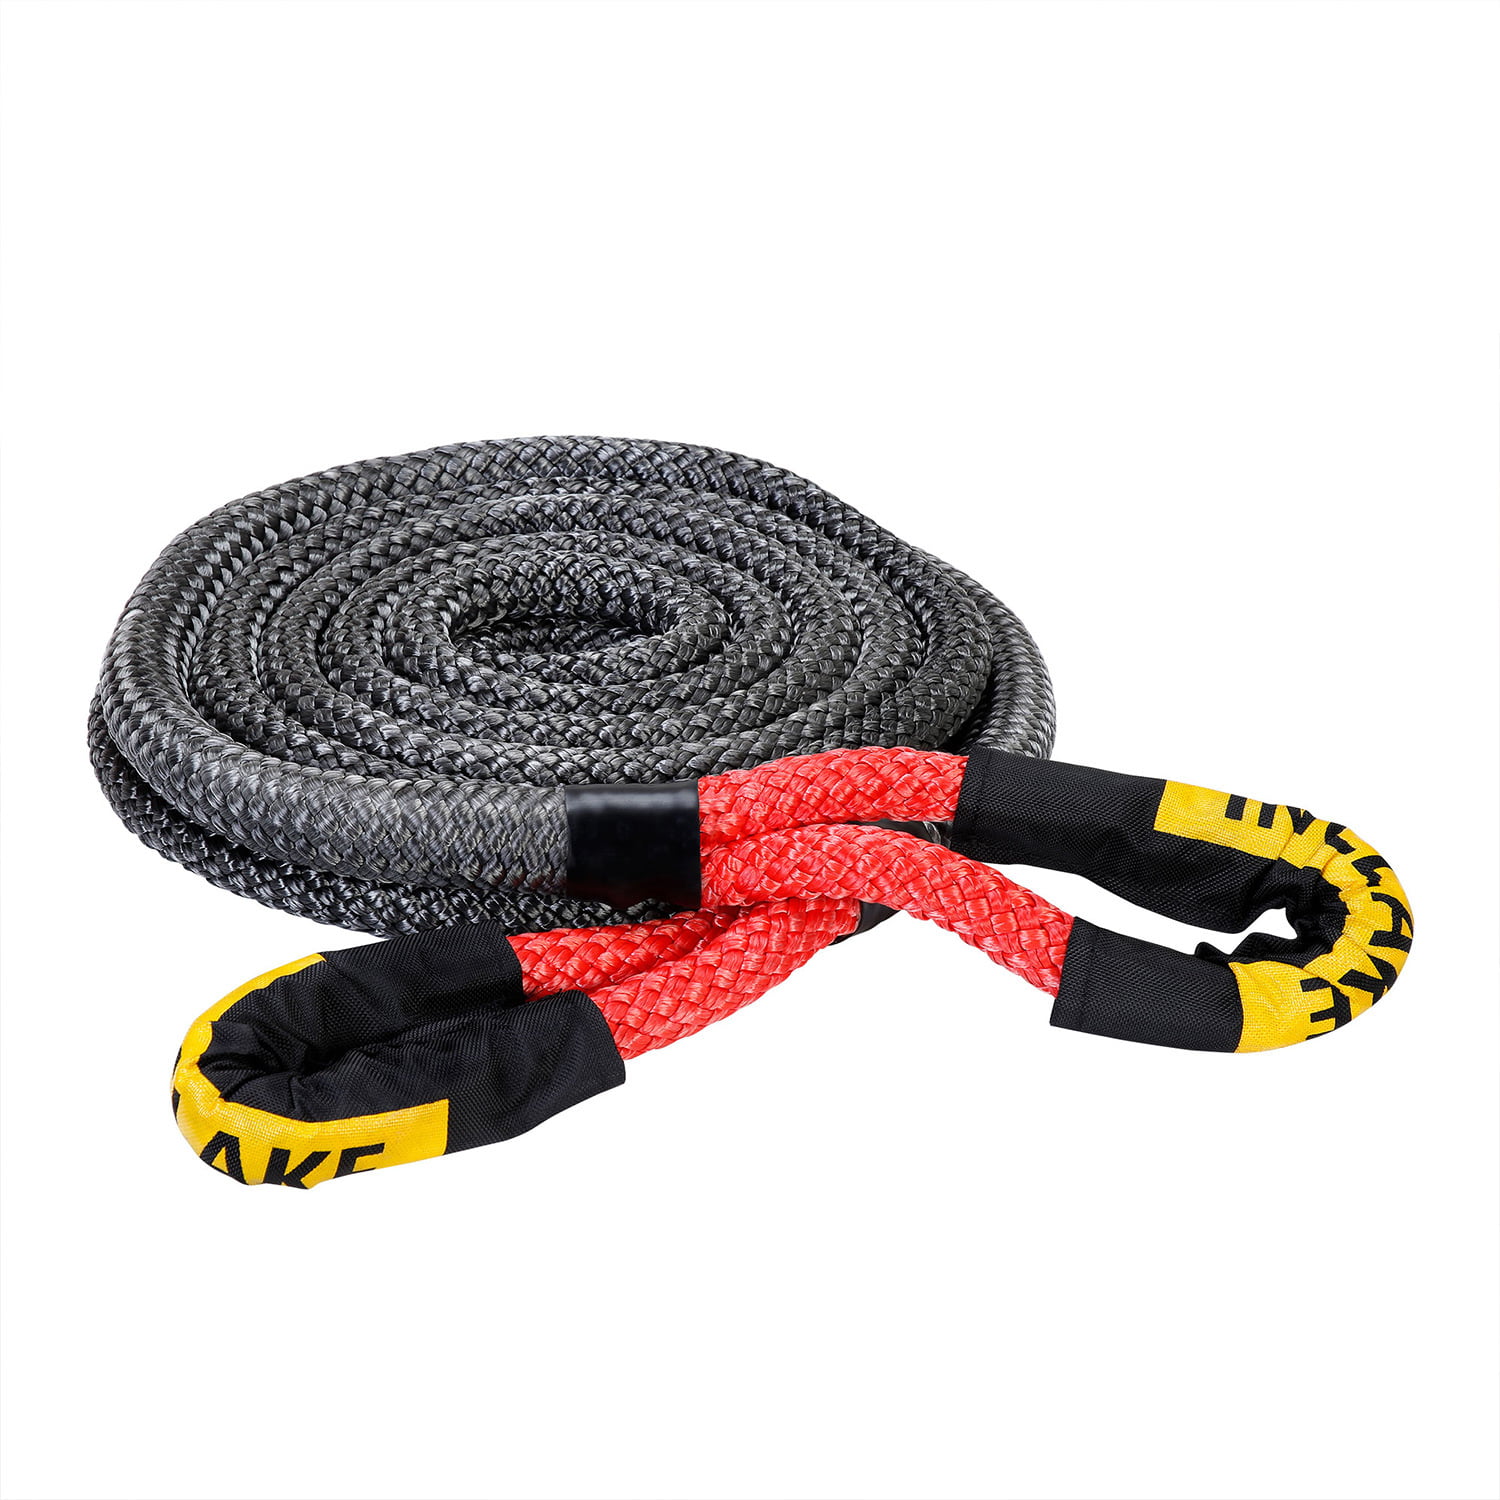 1.3 x 30ft （30000 LBs） Emergency Off-Road Recovery Strap Heavy Duty Nylon Braided Rope with Red Reinforced Loops and Protective Sleeve for Truck ATV/UTV-Black INCLAKE-GJ-9MTS-41001 Kinetic Tow Rope 